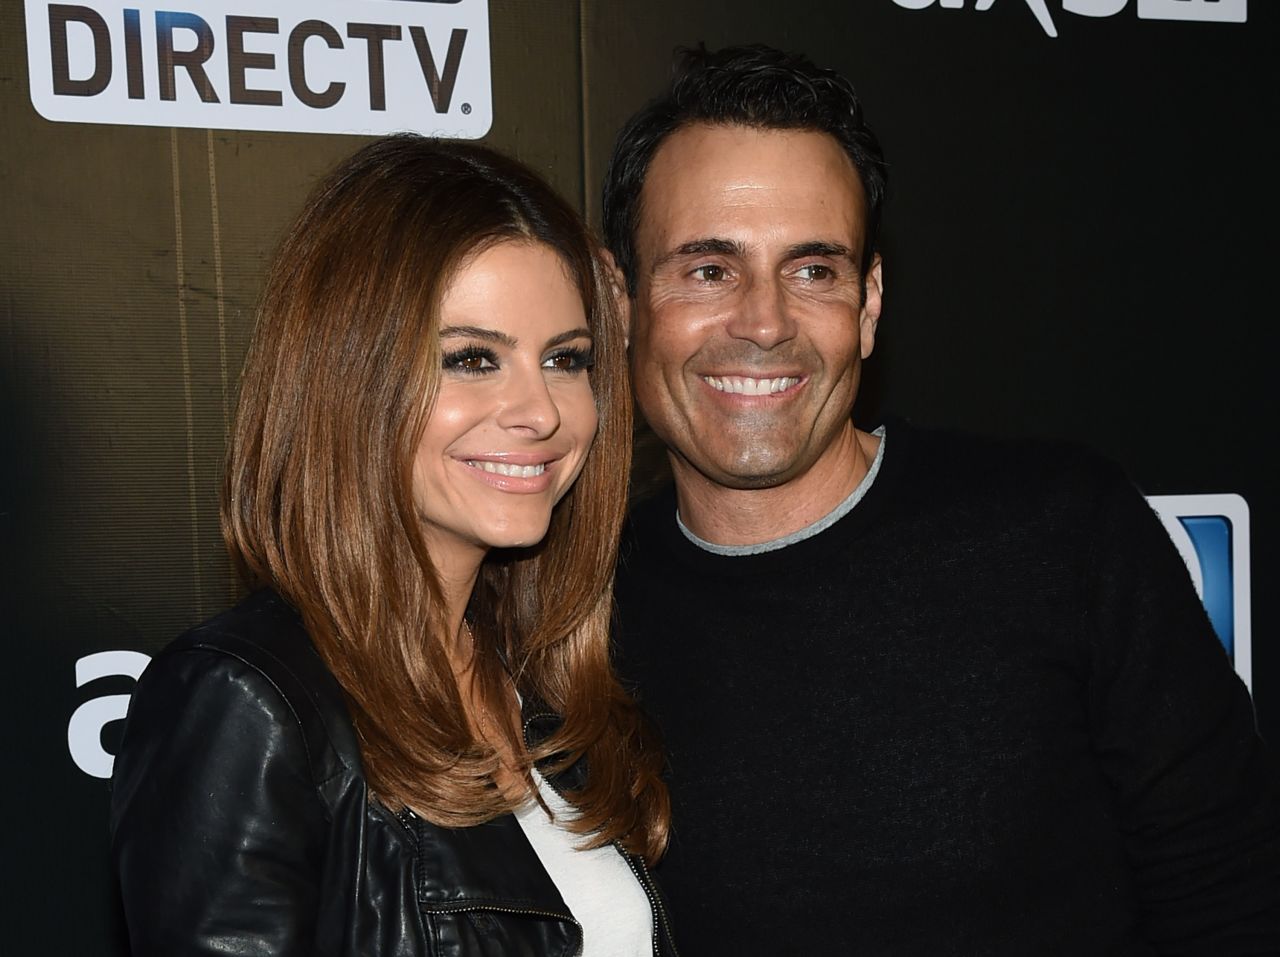 Television personality Maria Menounos and her boyfriend of 19 years, Keven Undergaro, are engaged. Undergaro proposed Wednesday during Howard Stern's SiriusXM radio show. "I had no idea. I thought he was joking," <a href="http://www.people.com/people/package/article/0,,20981907_20992566,00.html" target="_blank" target="_blank">Menounos told People magazine</a>.